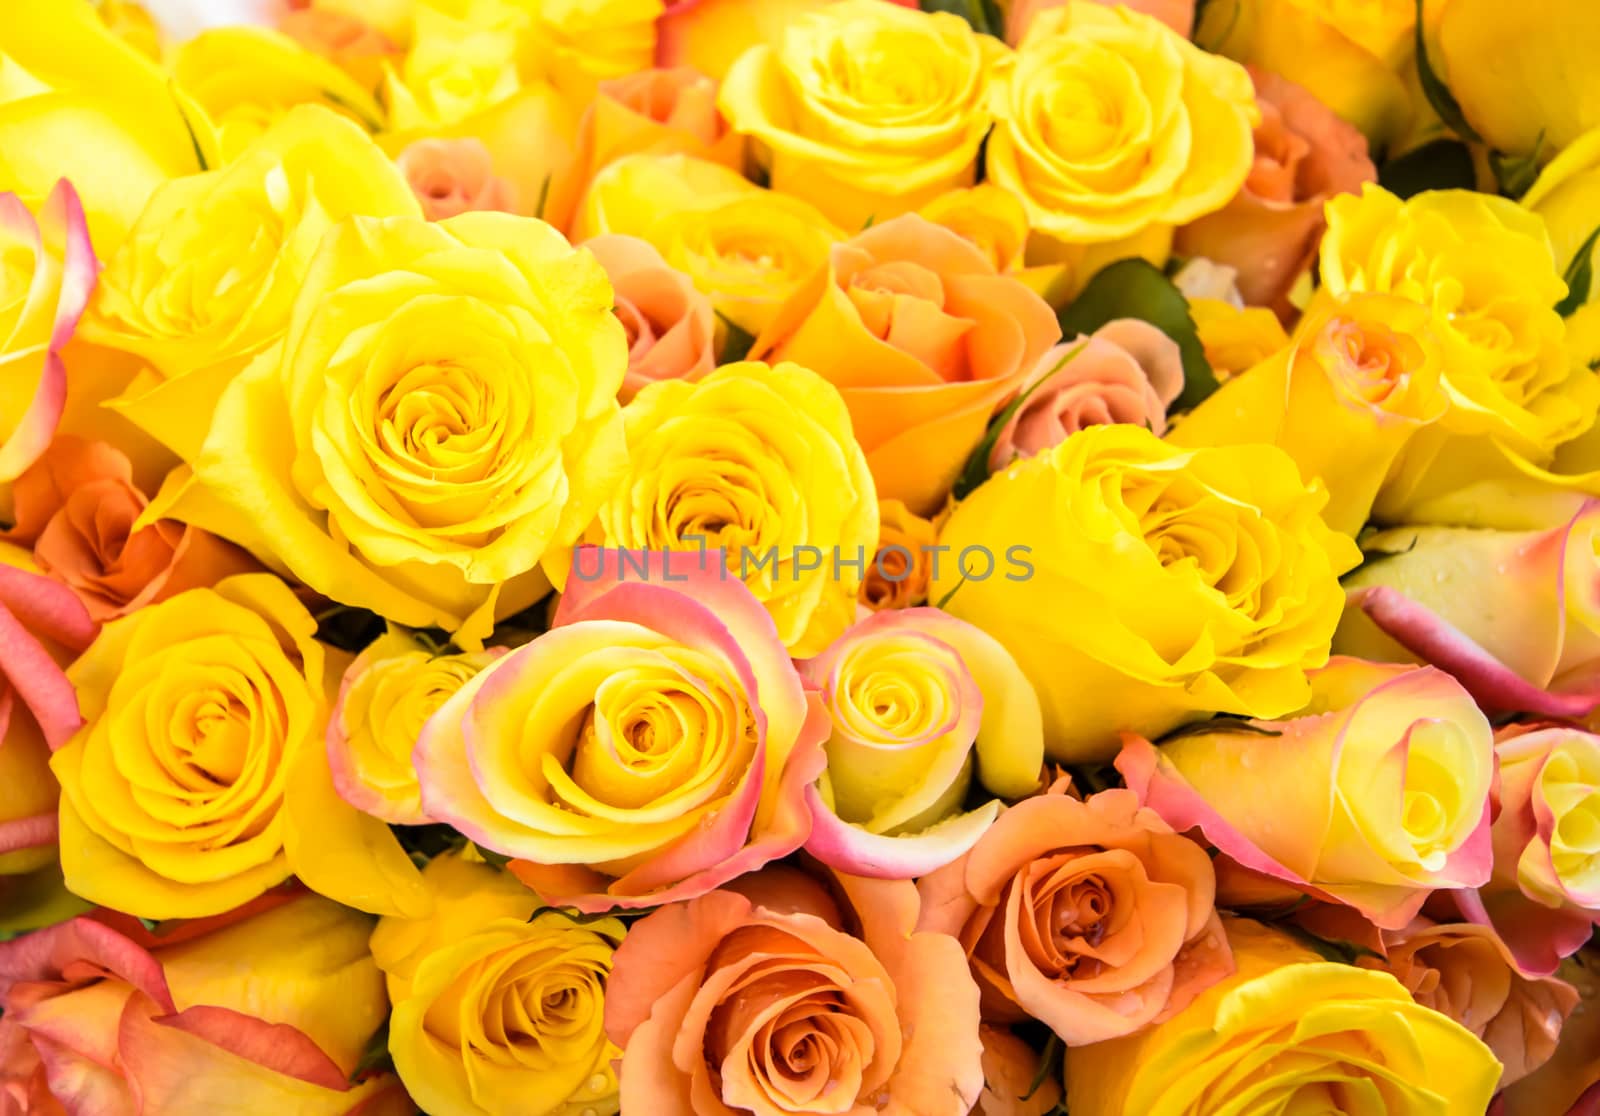 Yellow roses putting together many of flowers.